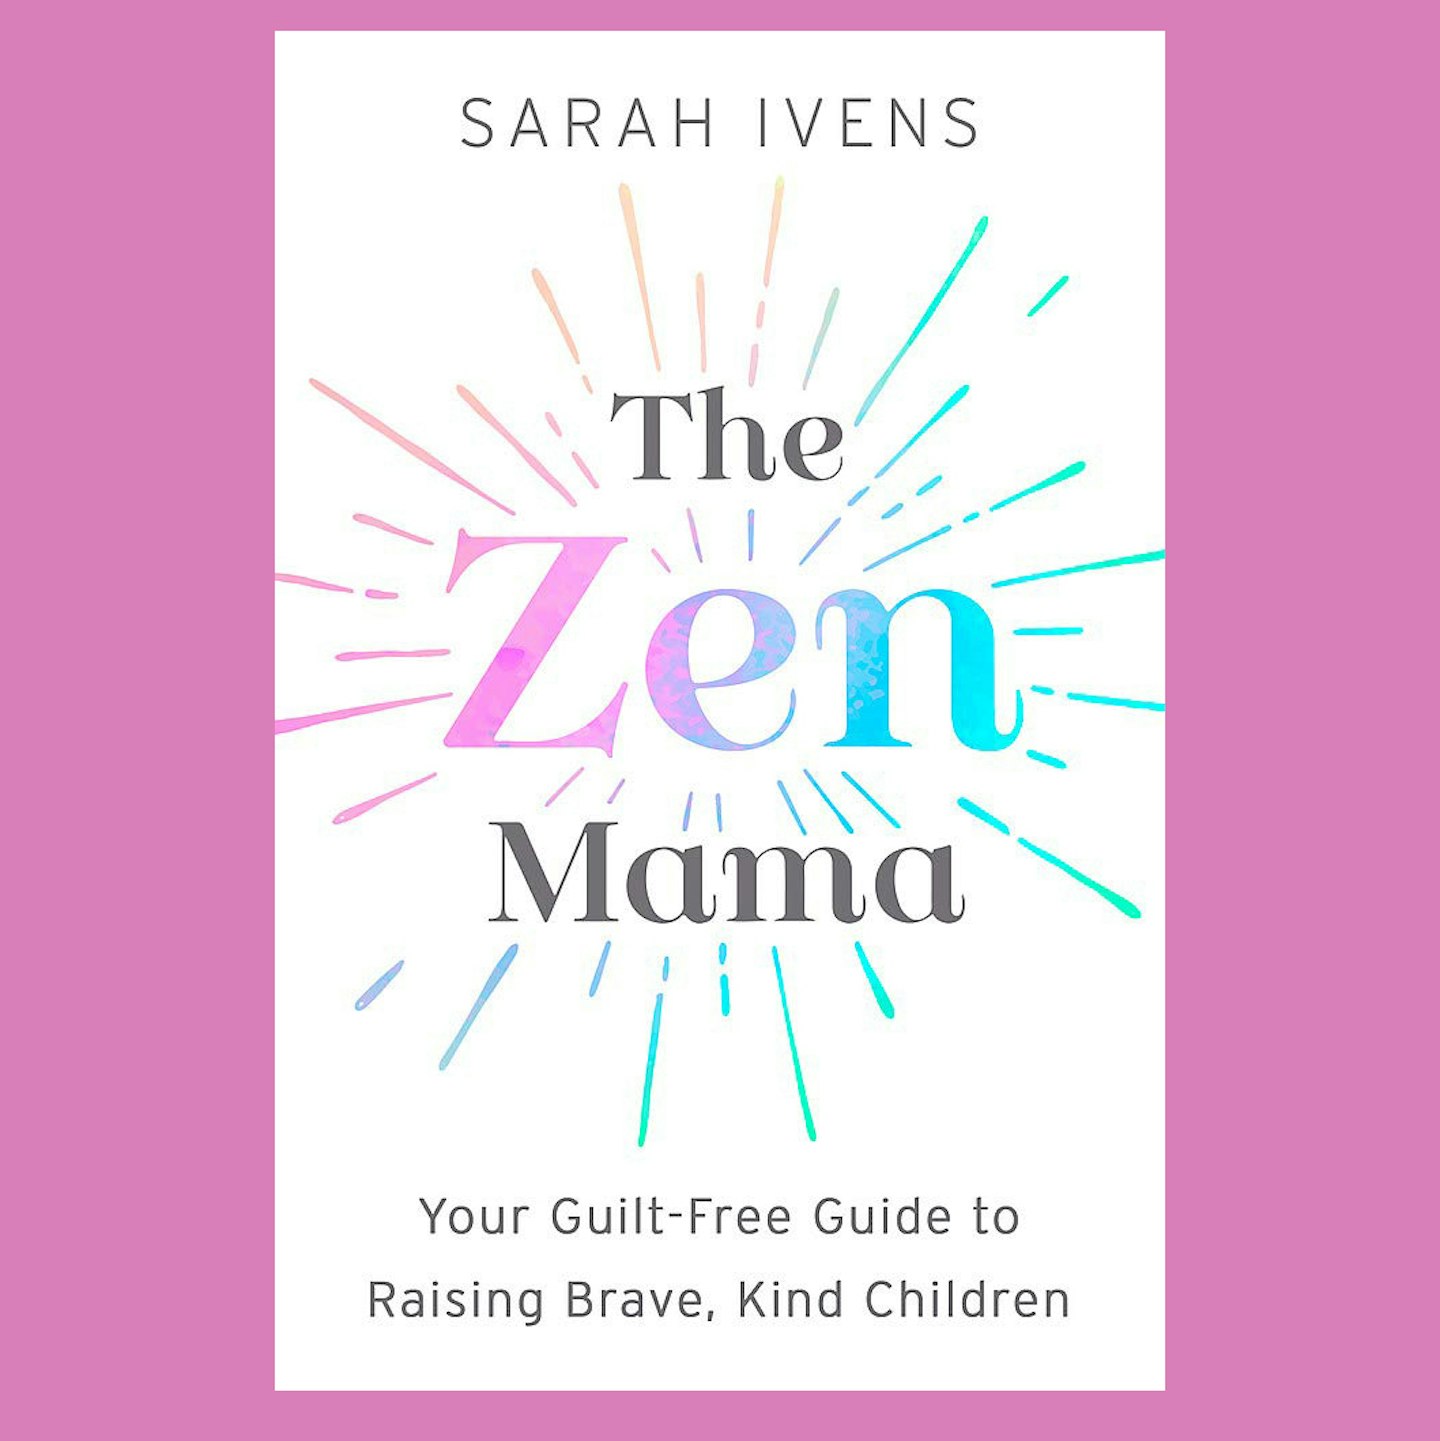 The Zen Mama by Sarah Ivens